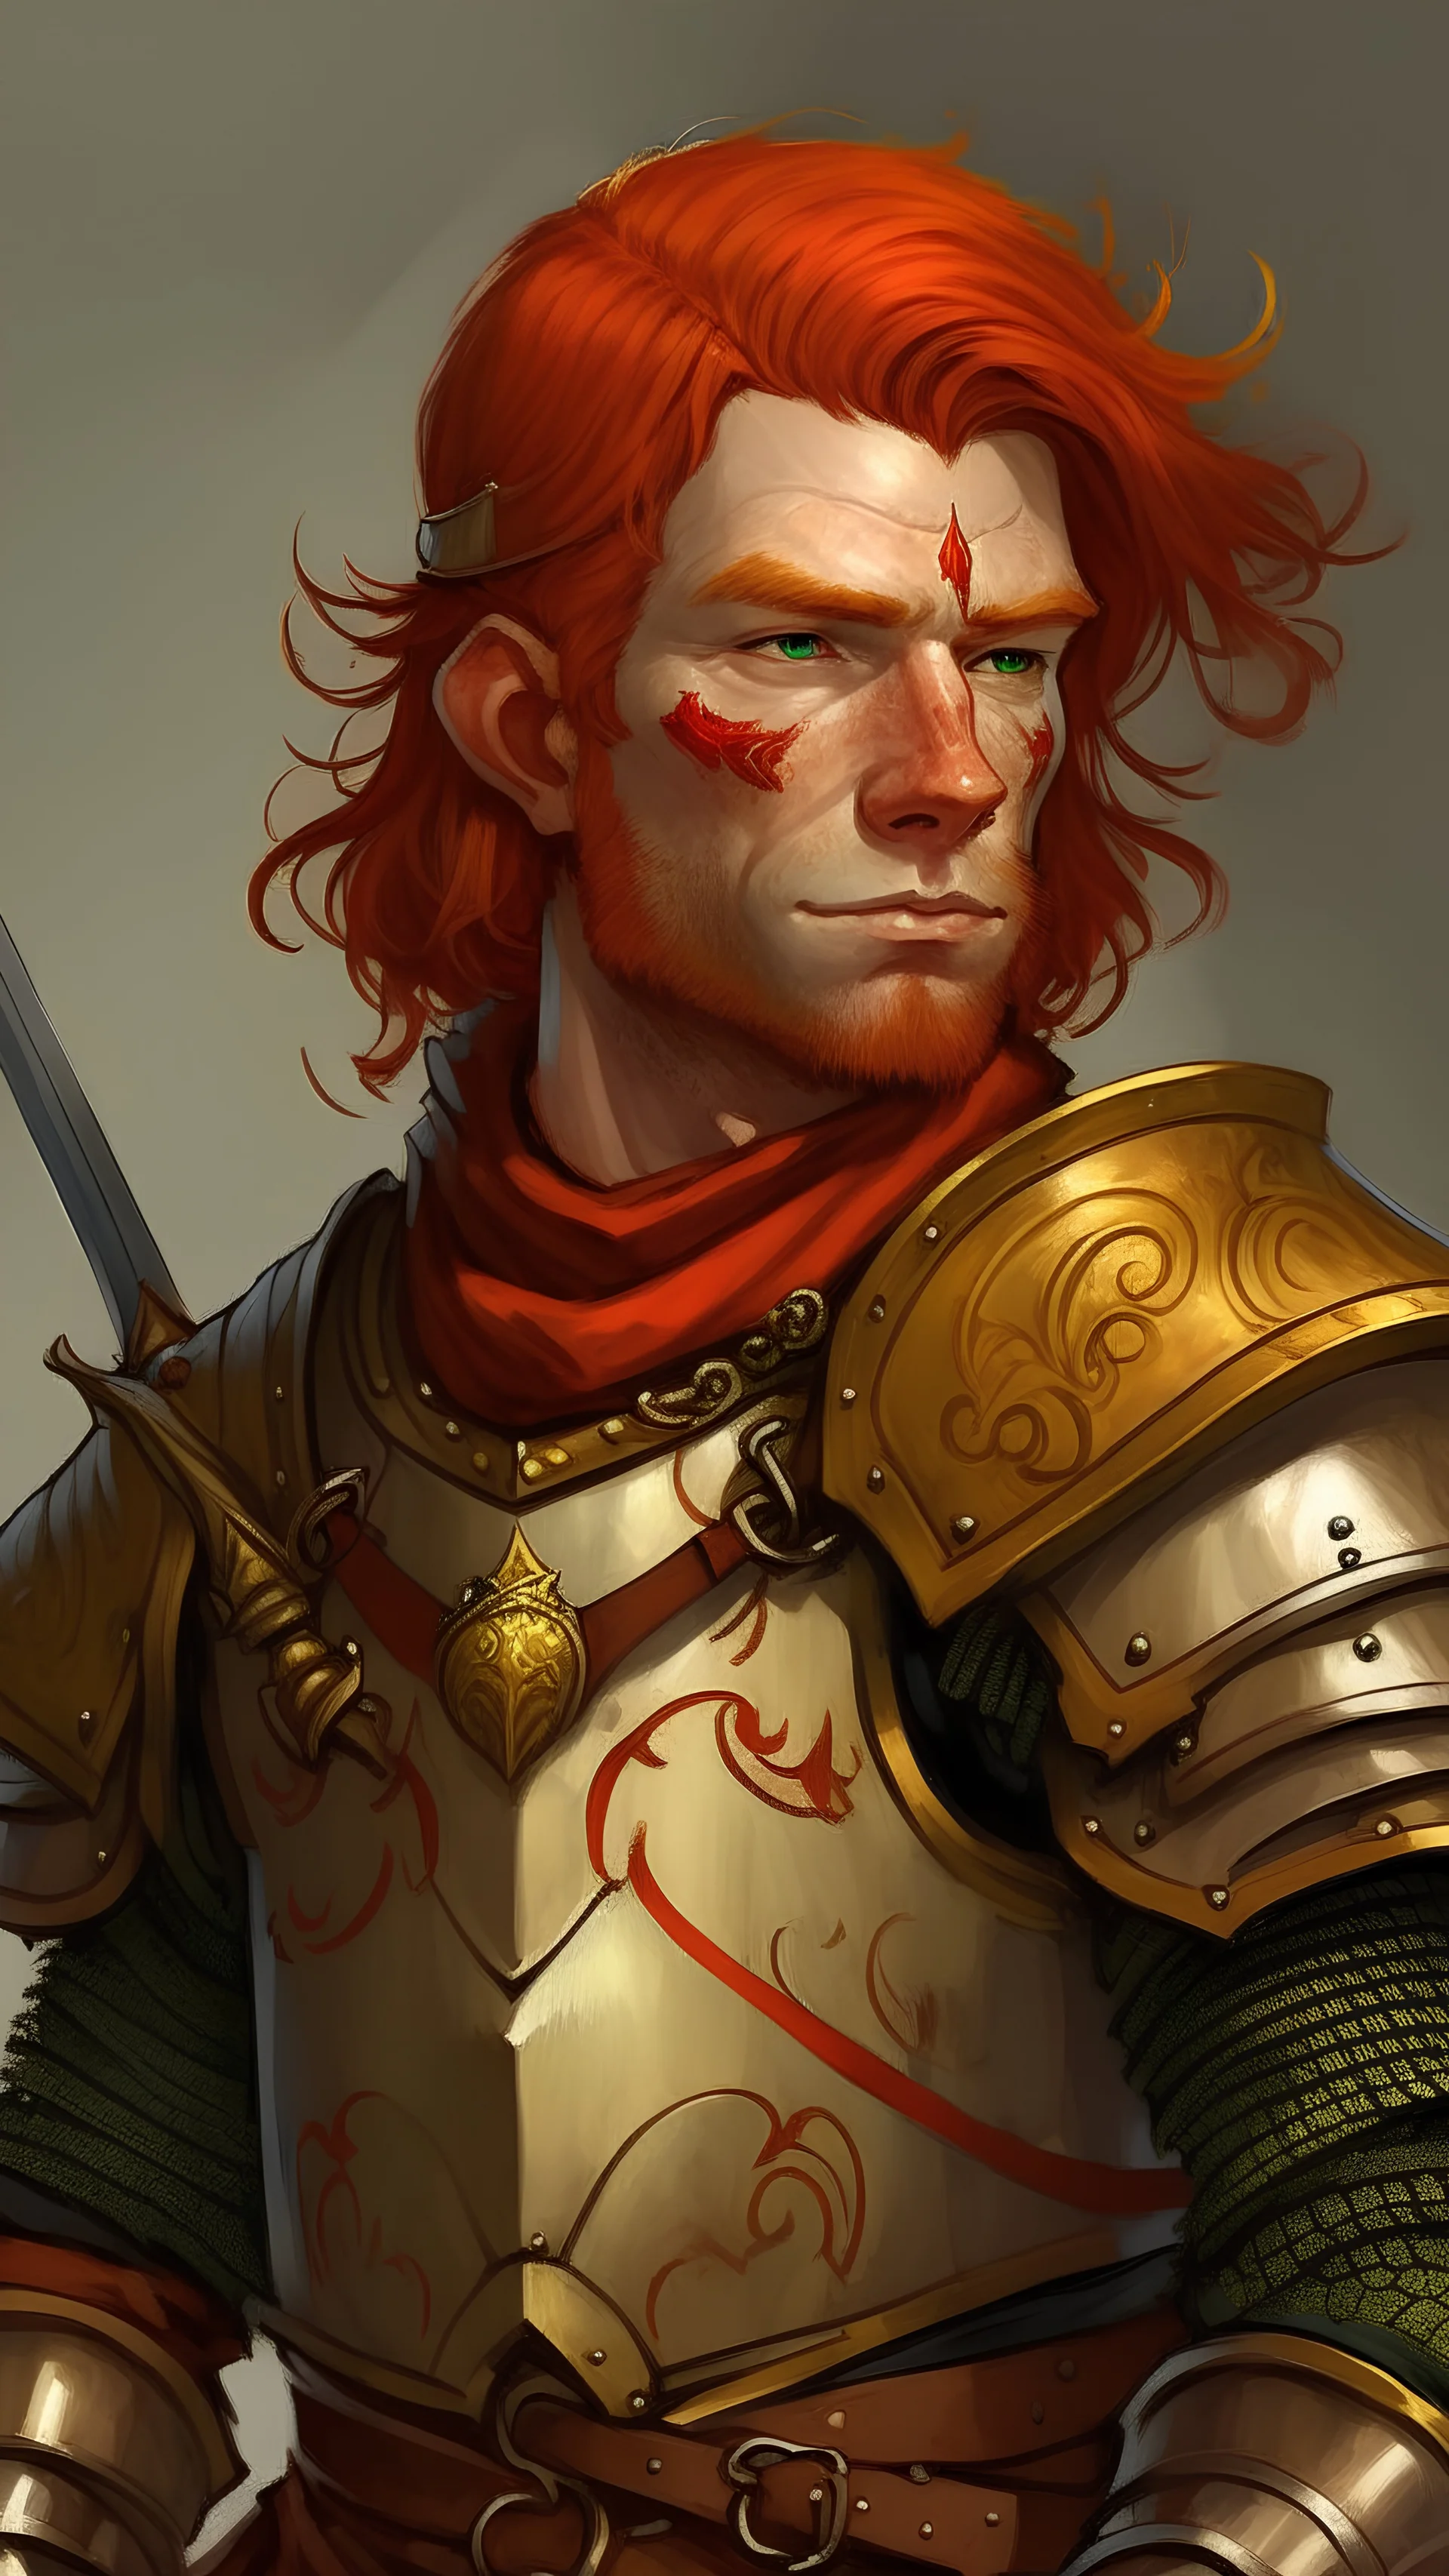 a red head todeler Knight